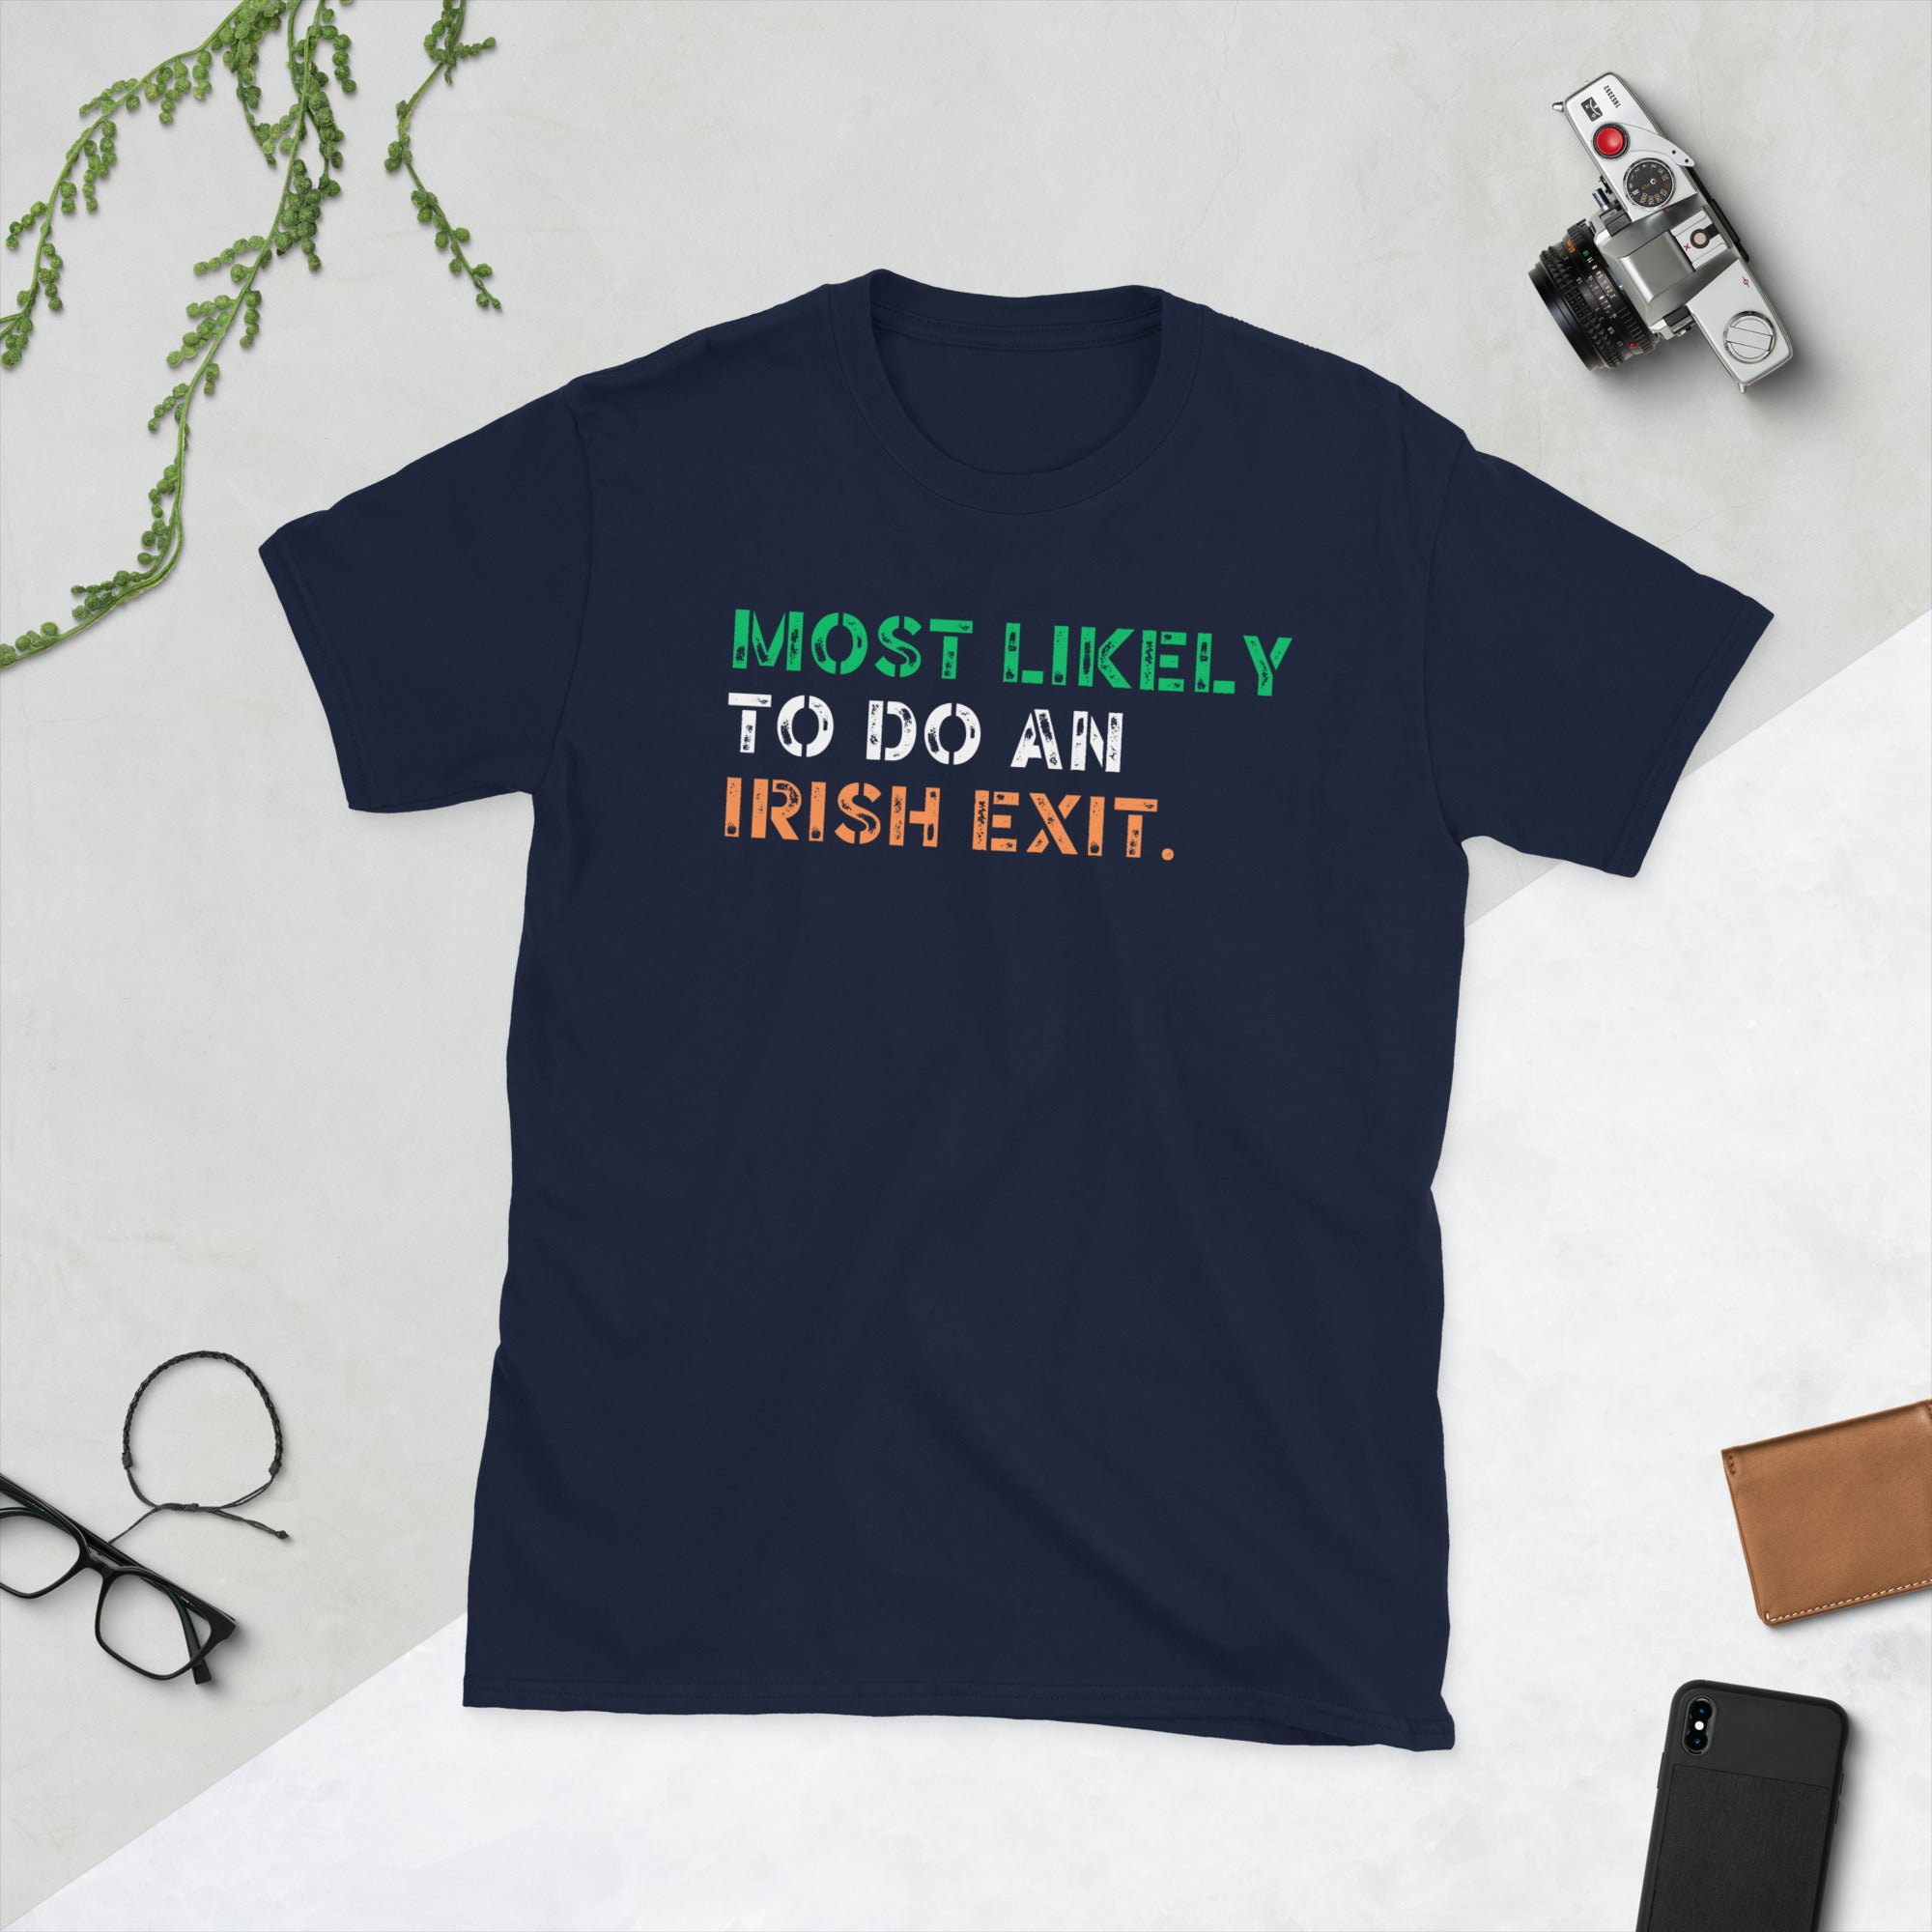 Most Likely To Do An Irish Exit Shirt, St Patricks Day Party Group Matching Tshirts, St Patricks Day Tee, Irish Gifts, Shamrock T Shirt - Madeinsea©